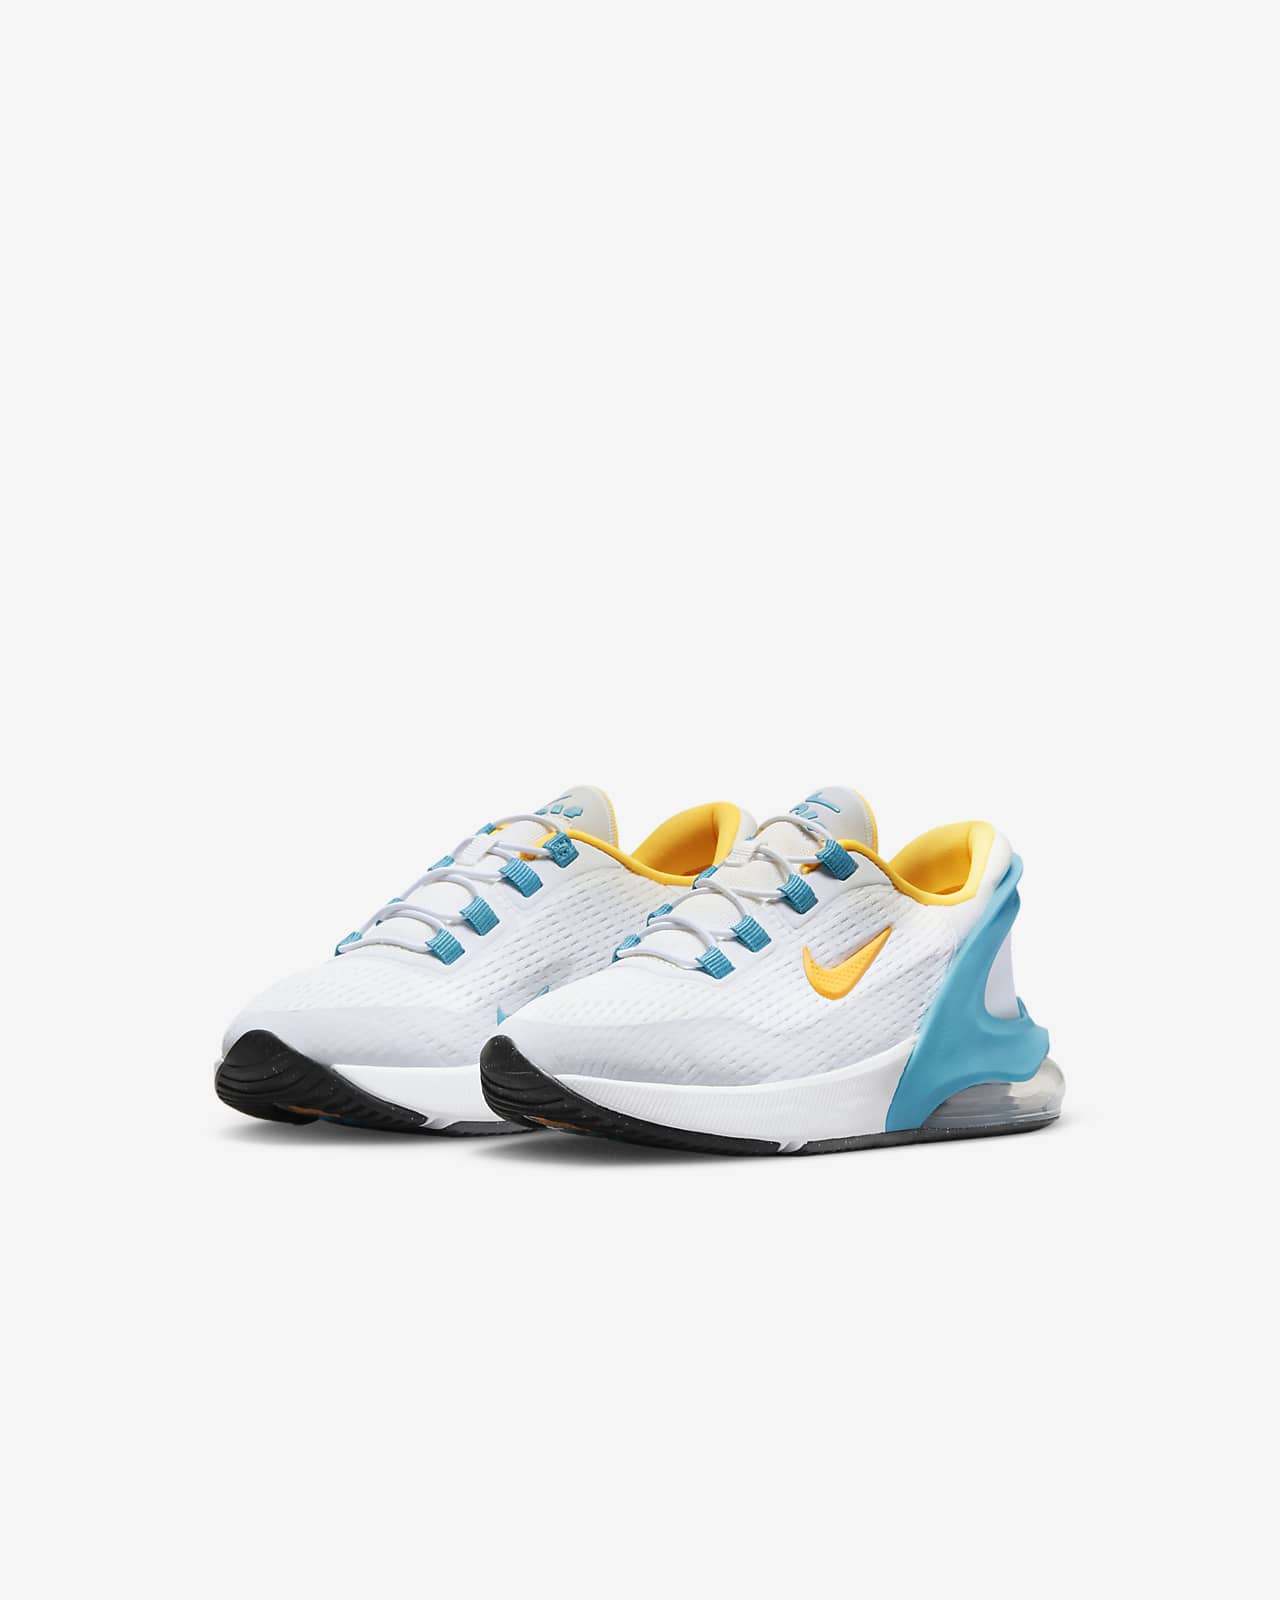 Over 50% Off Nike Air Max Shoes for the Family + FREE Shipping